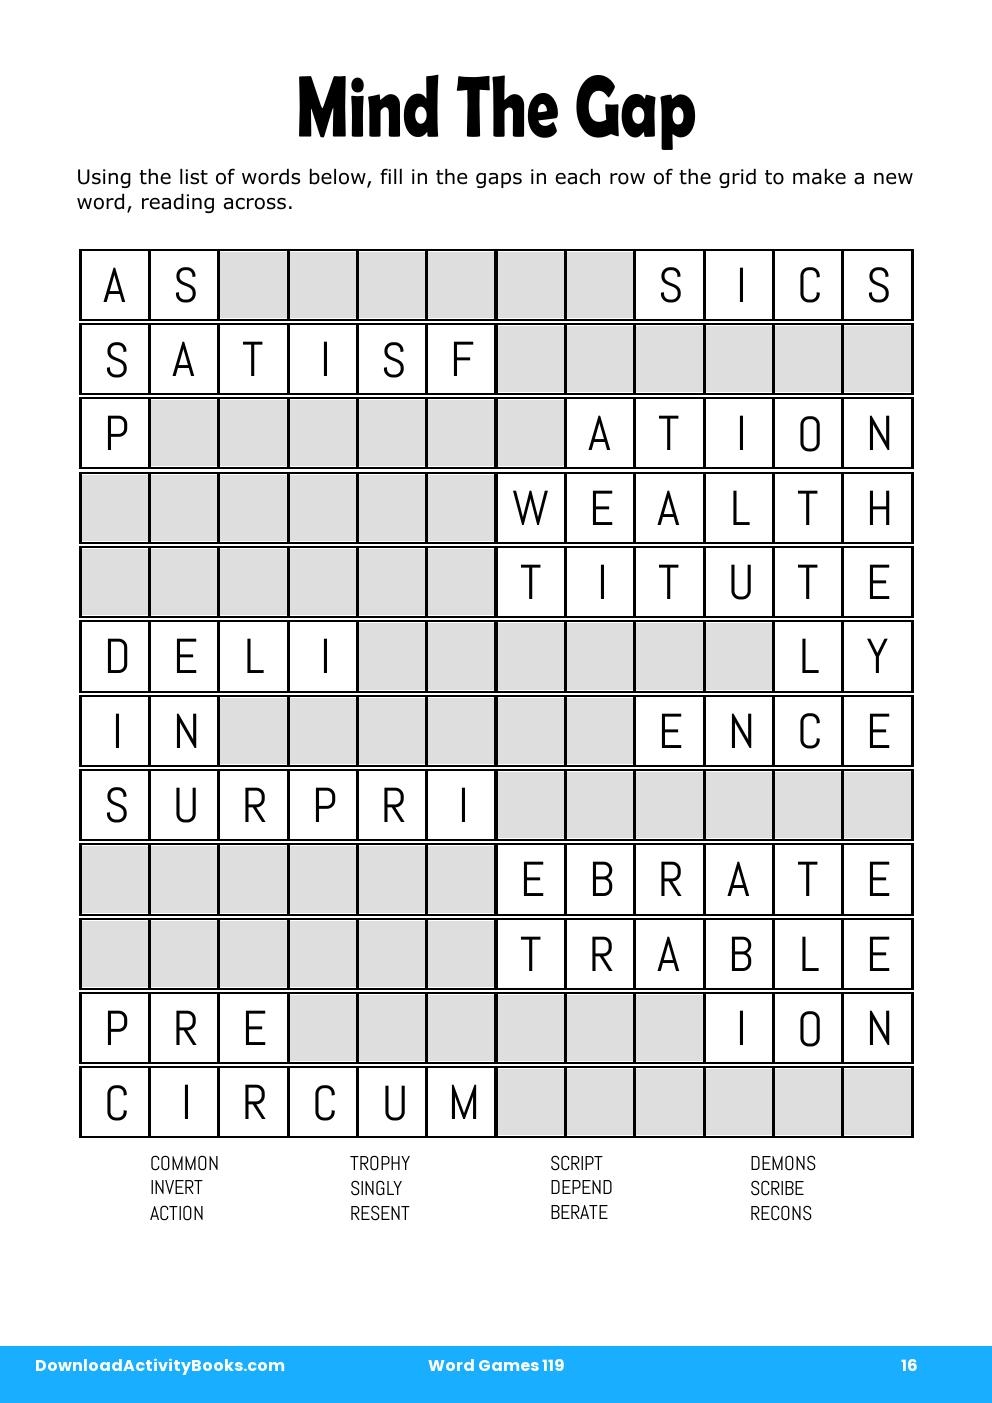 Mind The Gap in Word Games 119